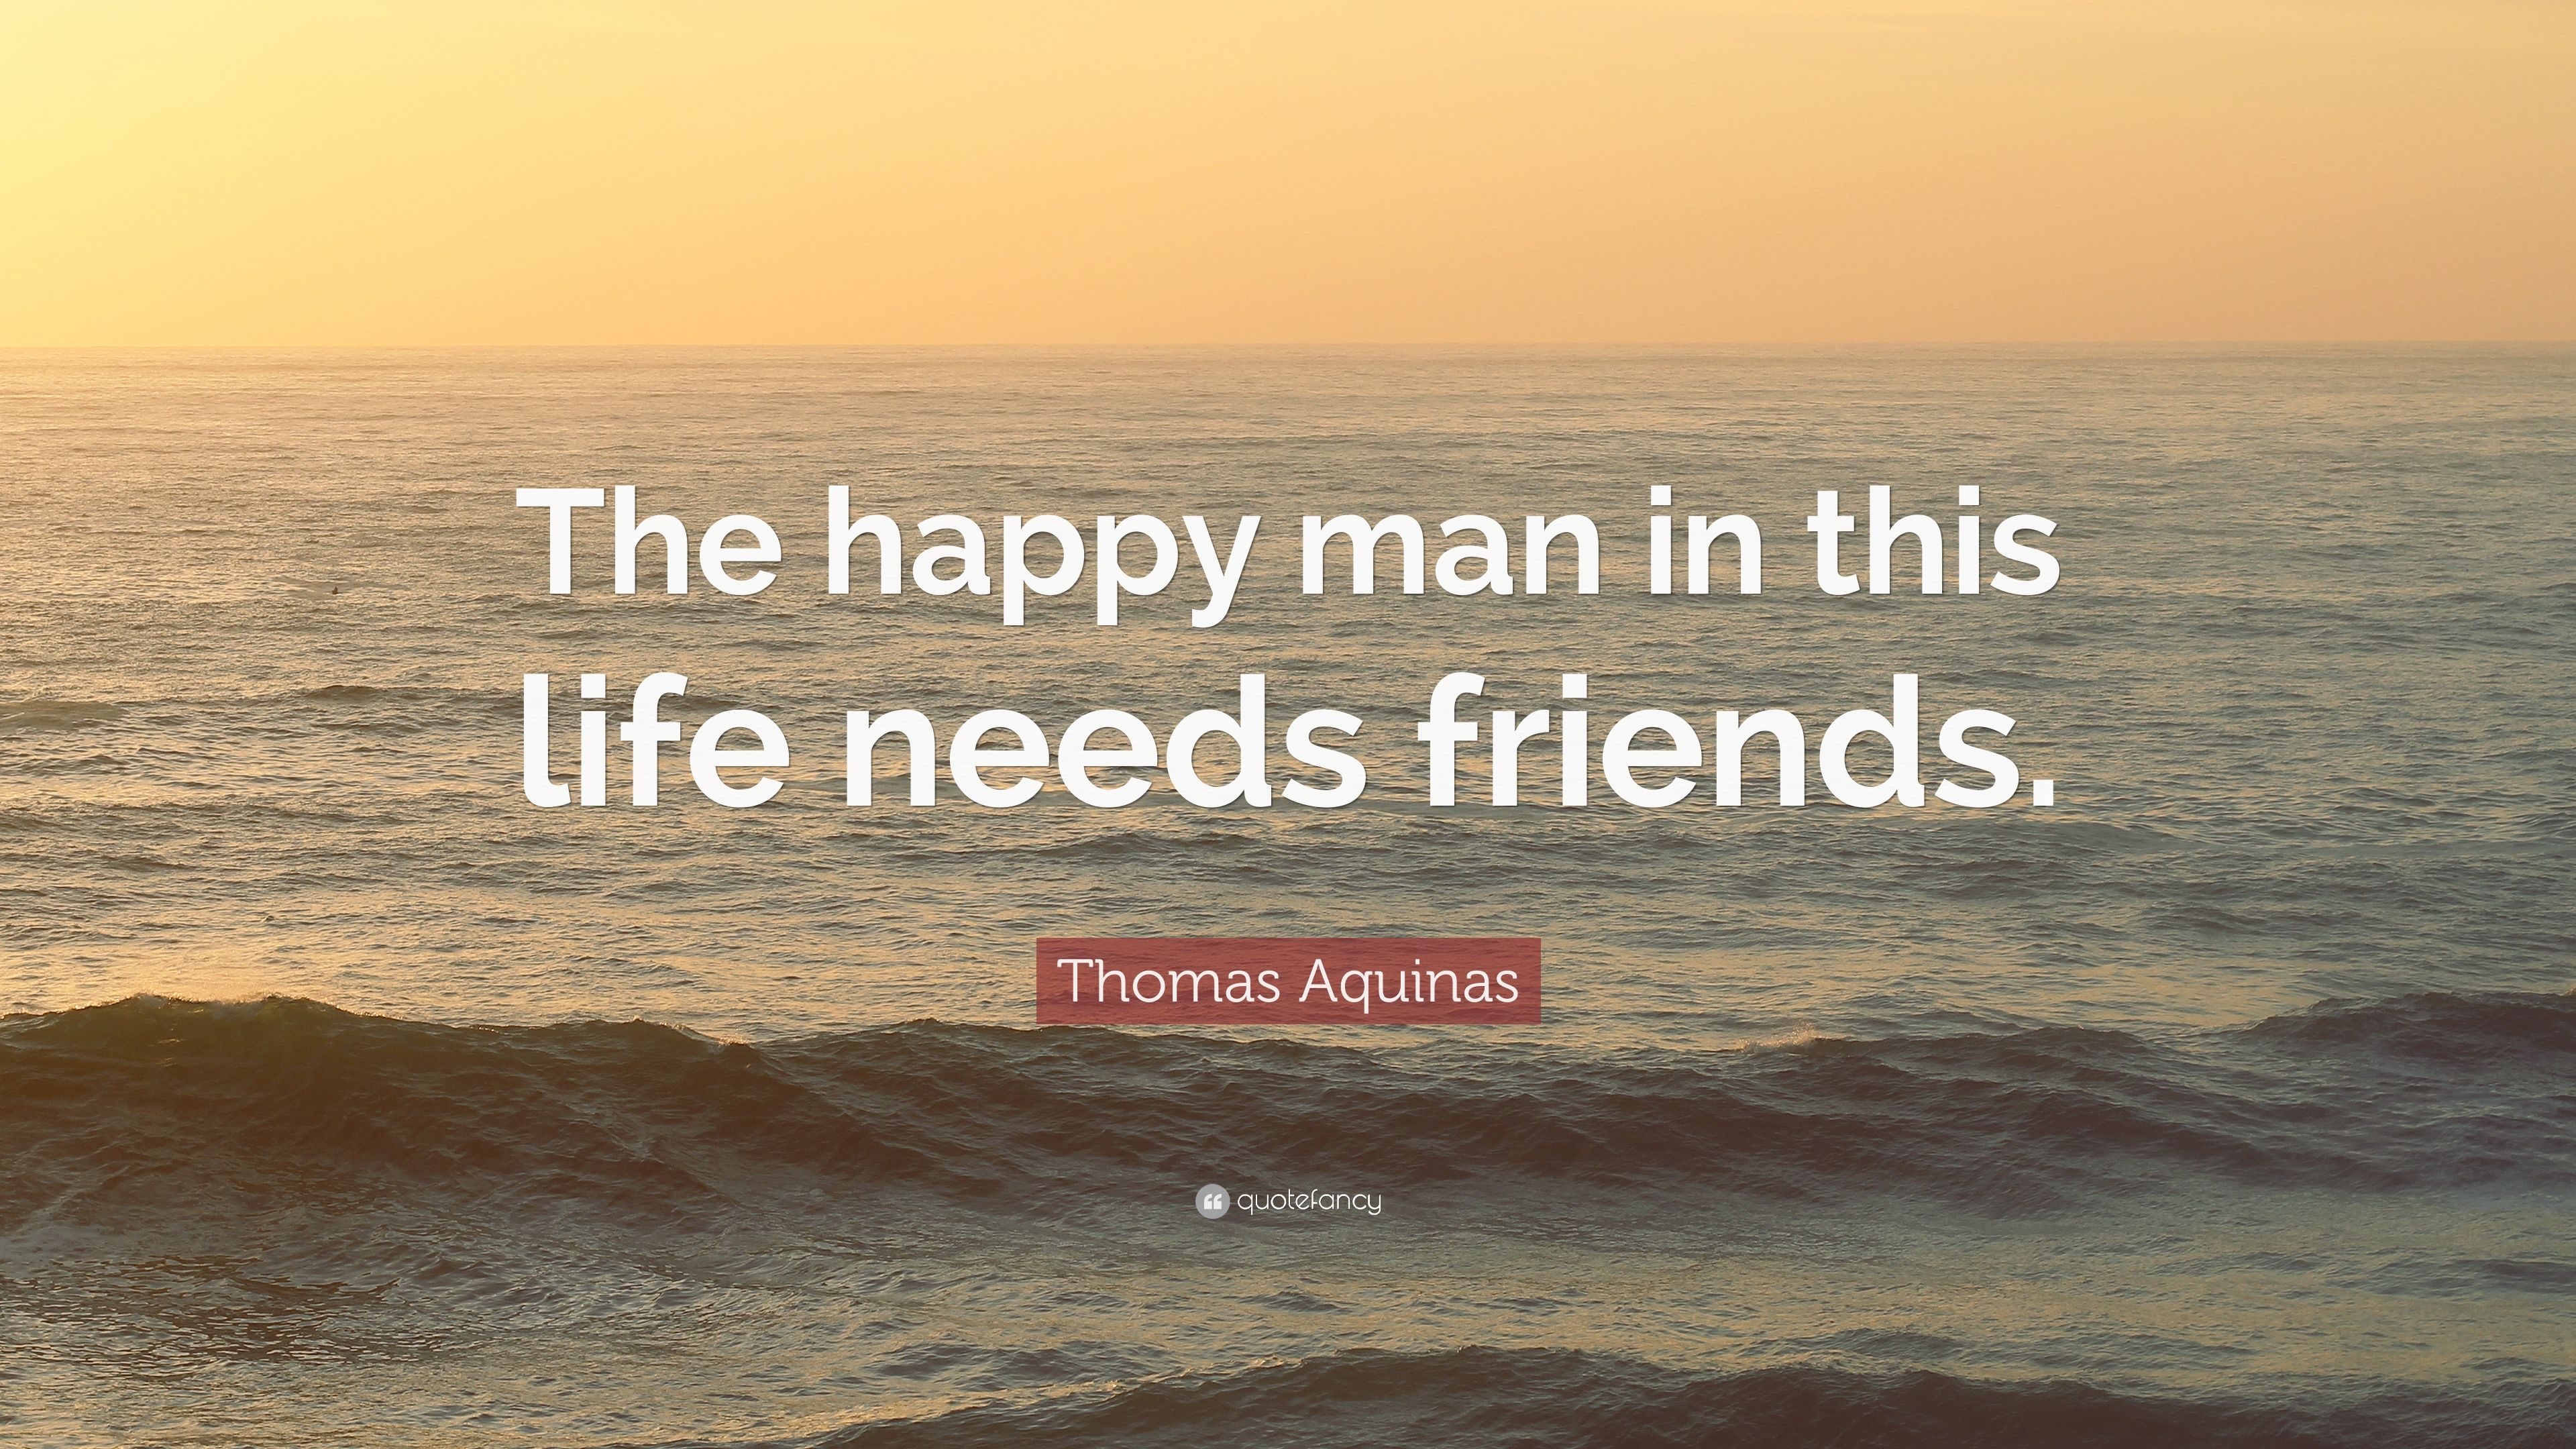 Thomas Aquinas Quote: “The happy man in this life needs friends